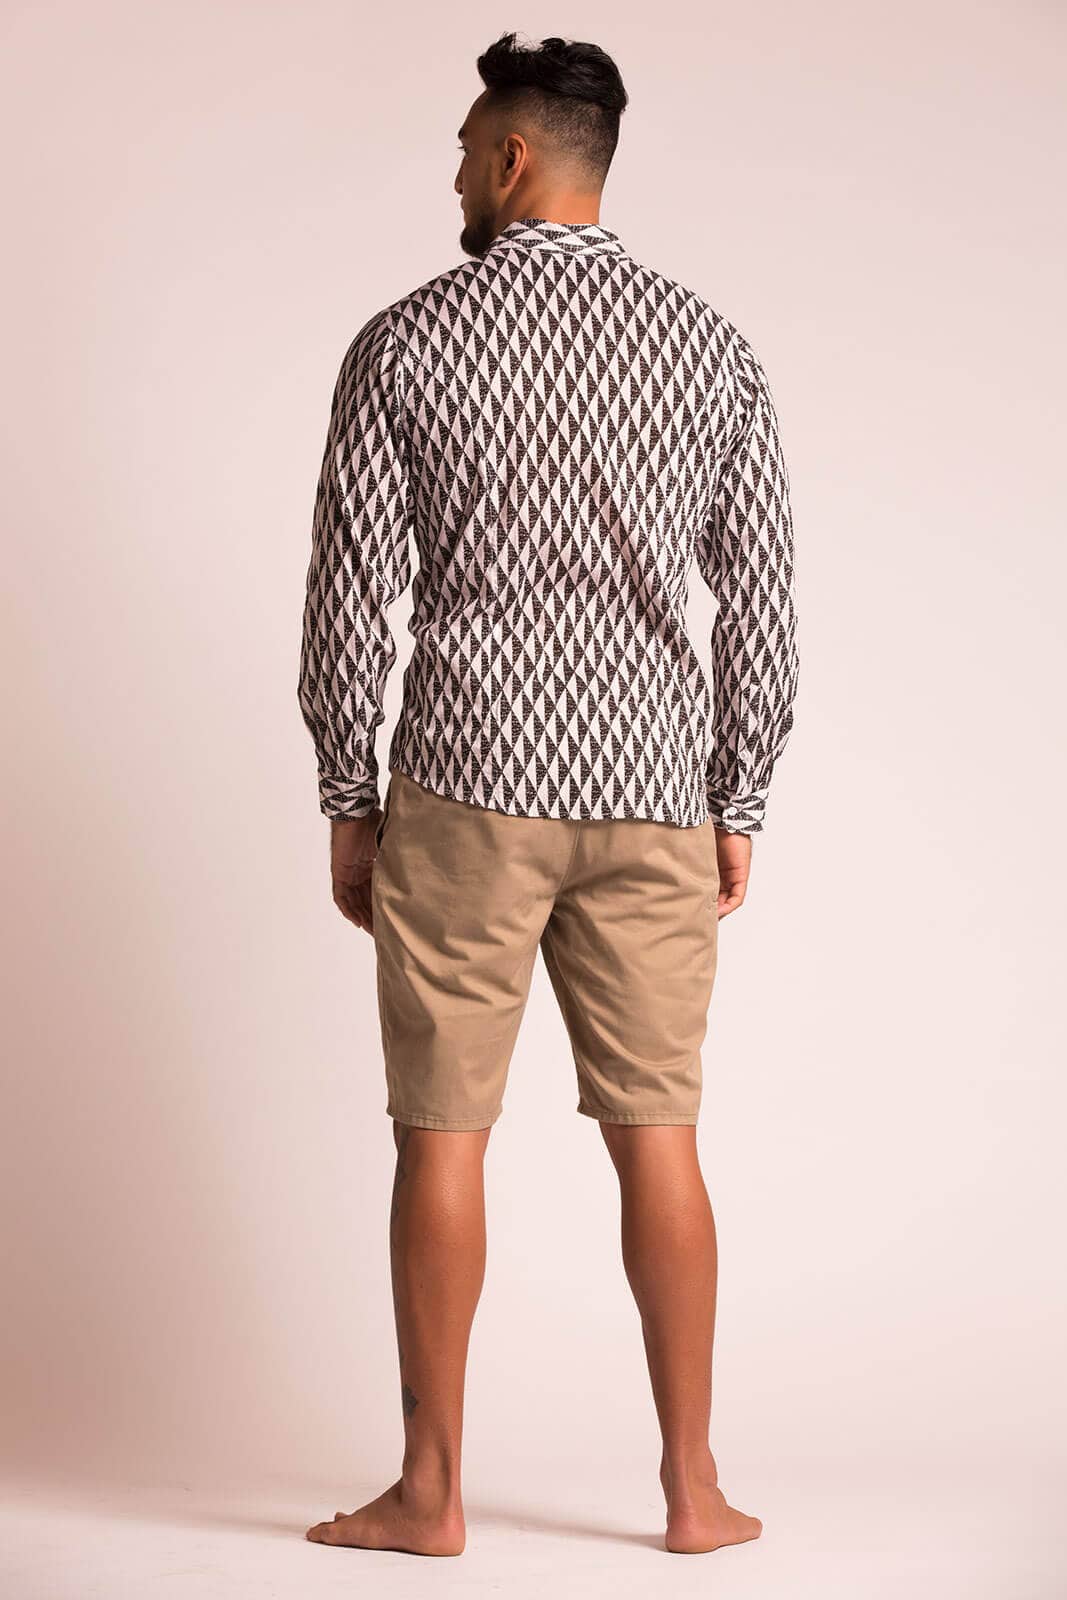 Male model wearing Hilo L-S in Mauna Pattern and Black and White Color - Back View